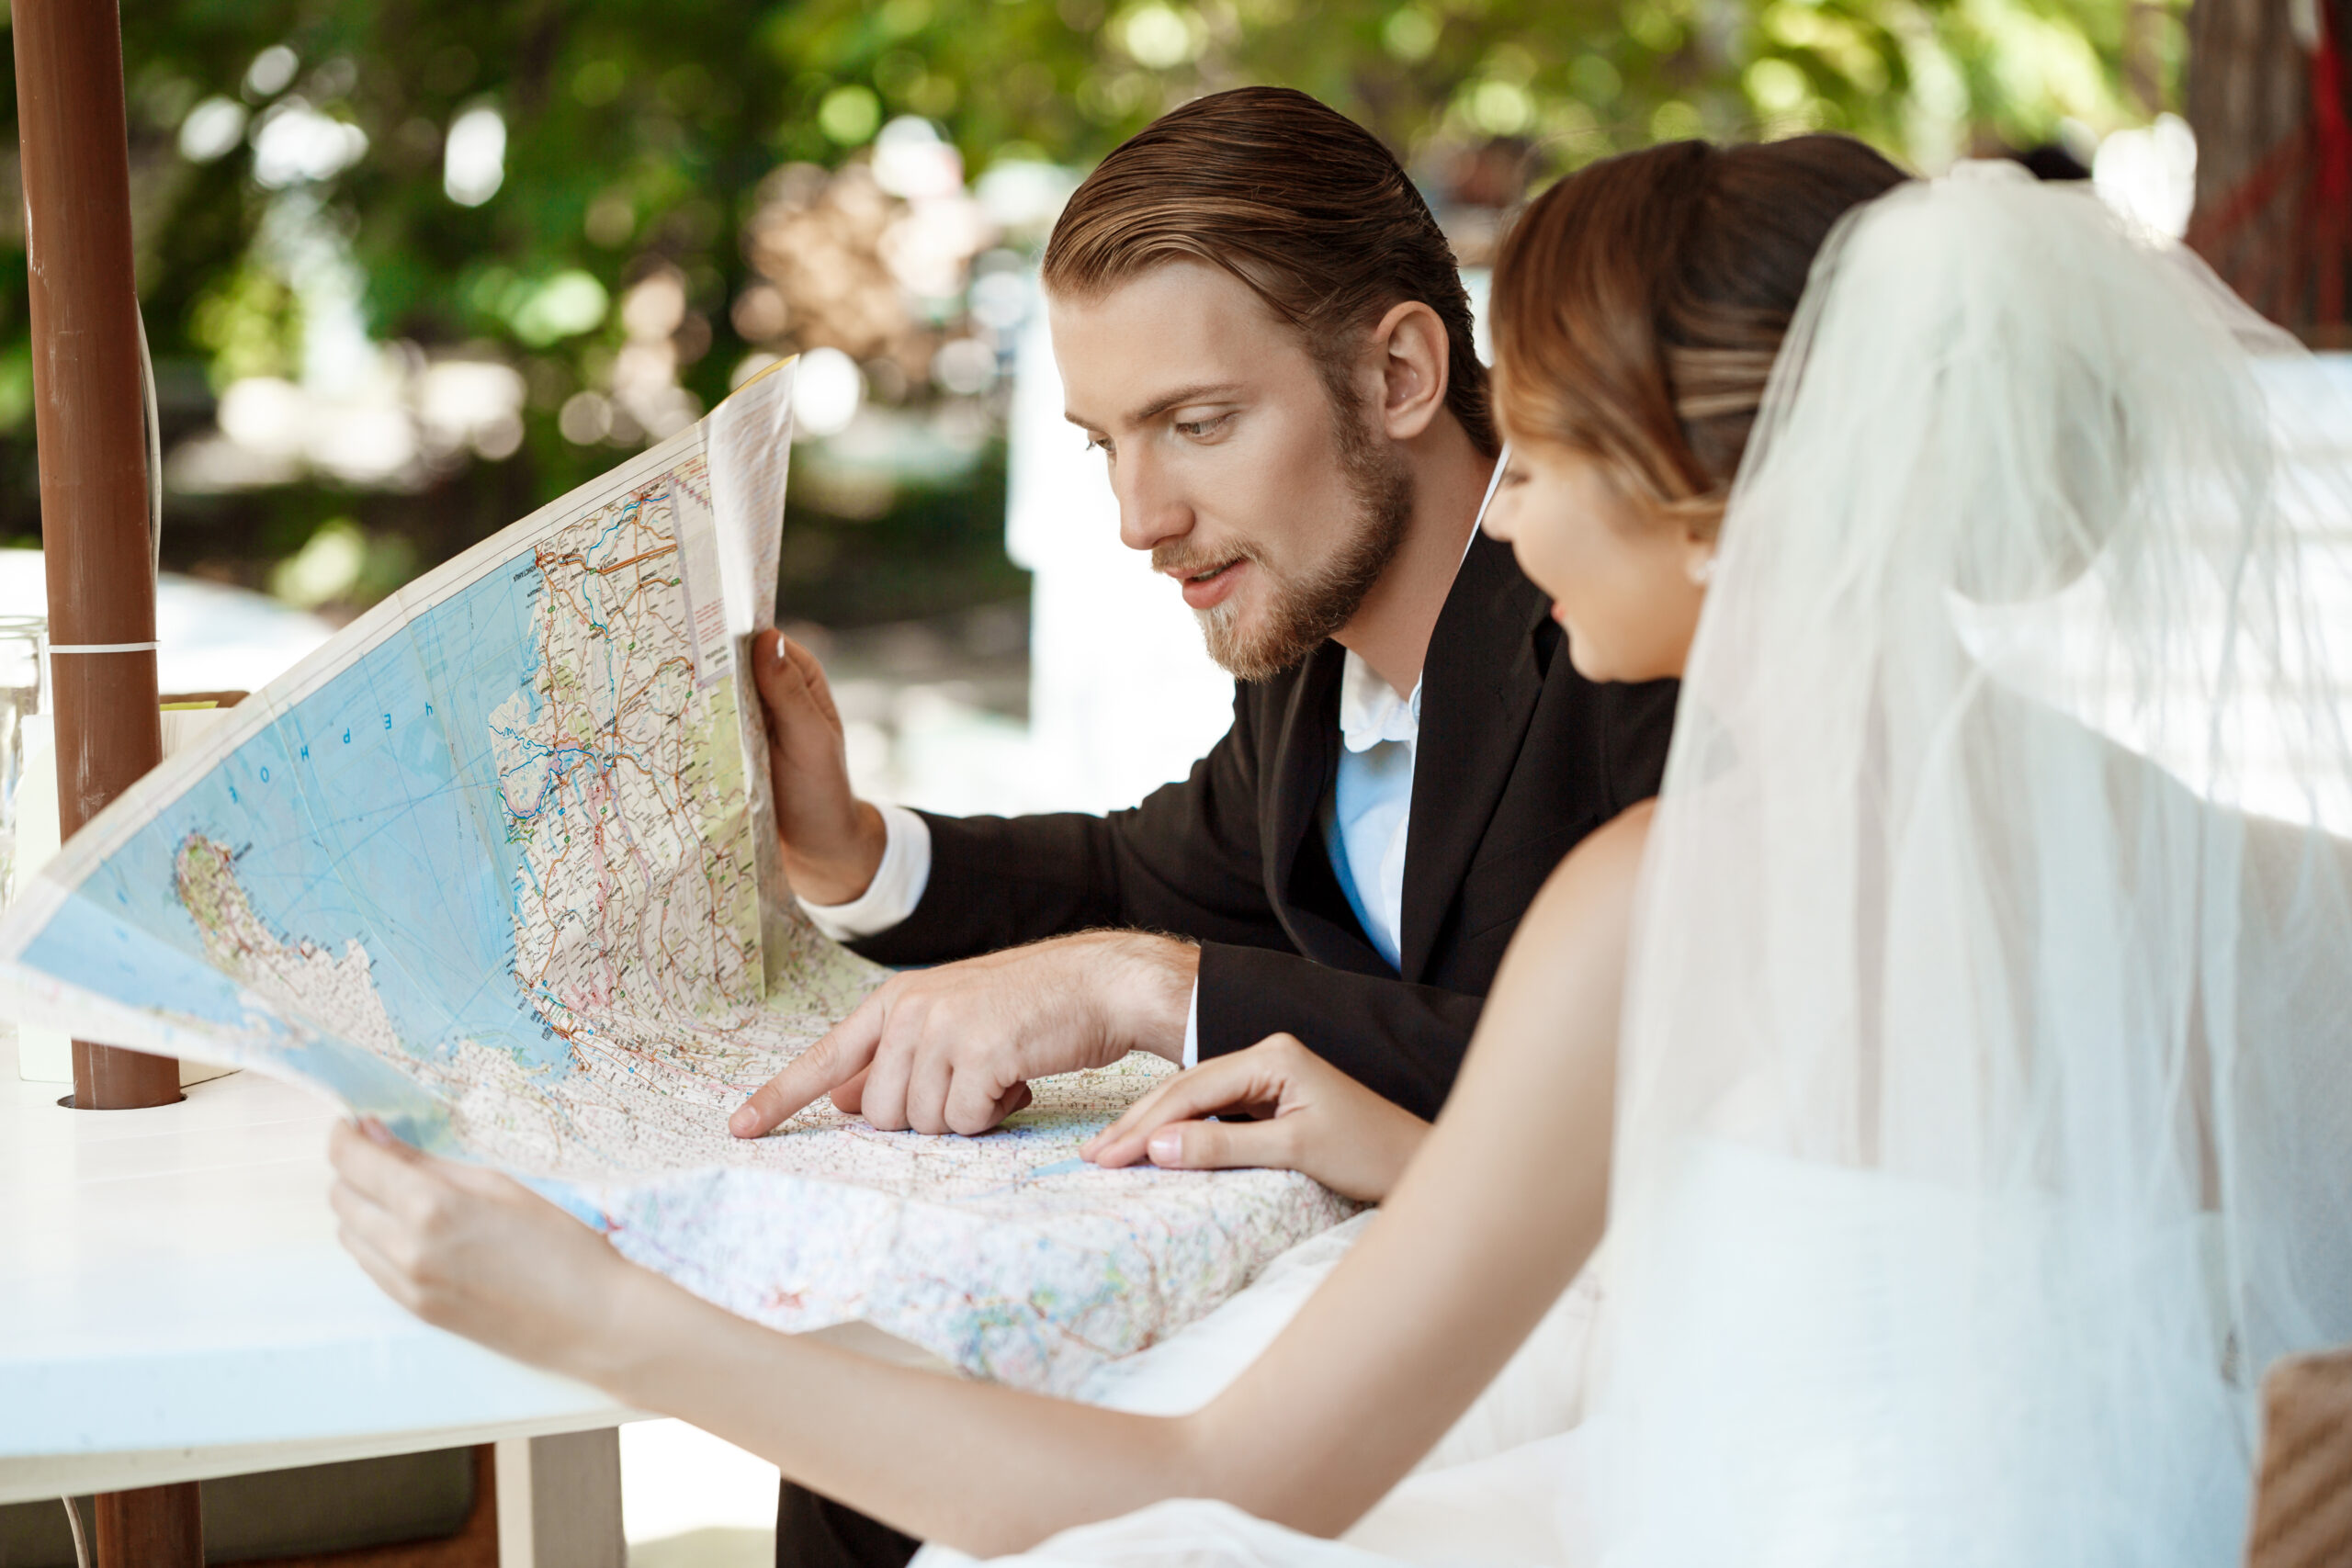 Your Ultimate Guide to Planning a Destination Wedding Abroad